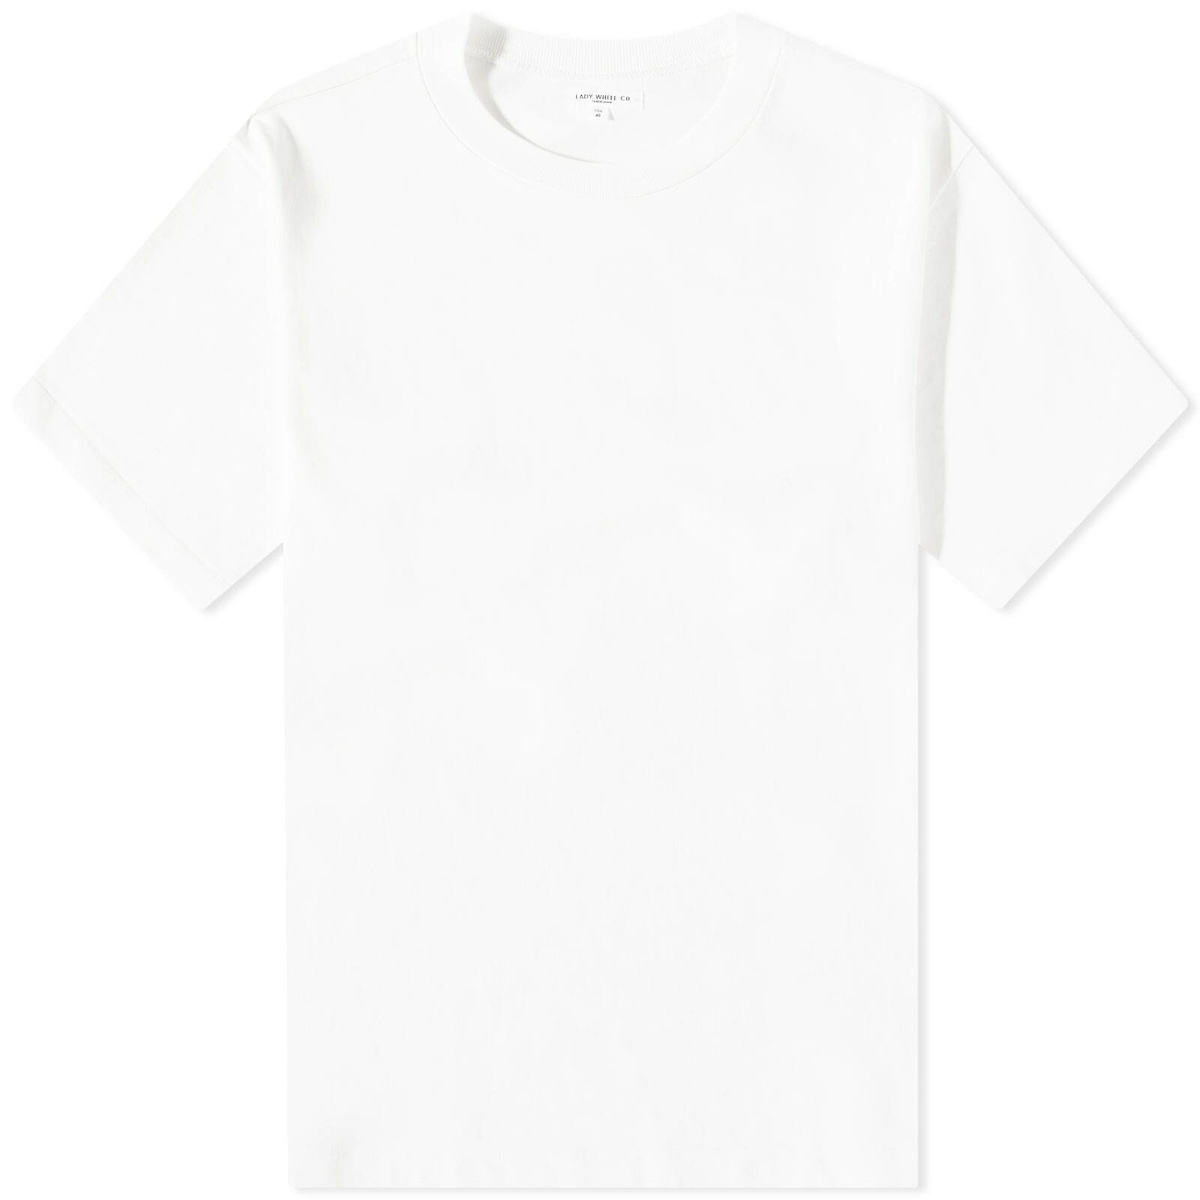 Lady Co. Men's Rugby Heavyweight T-Shirt in White Lady White Co.